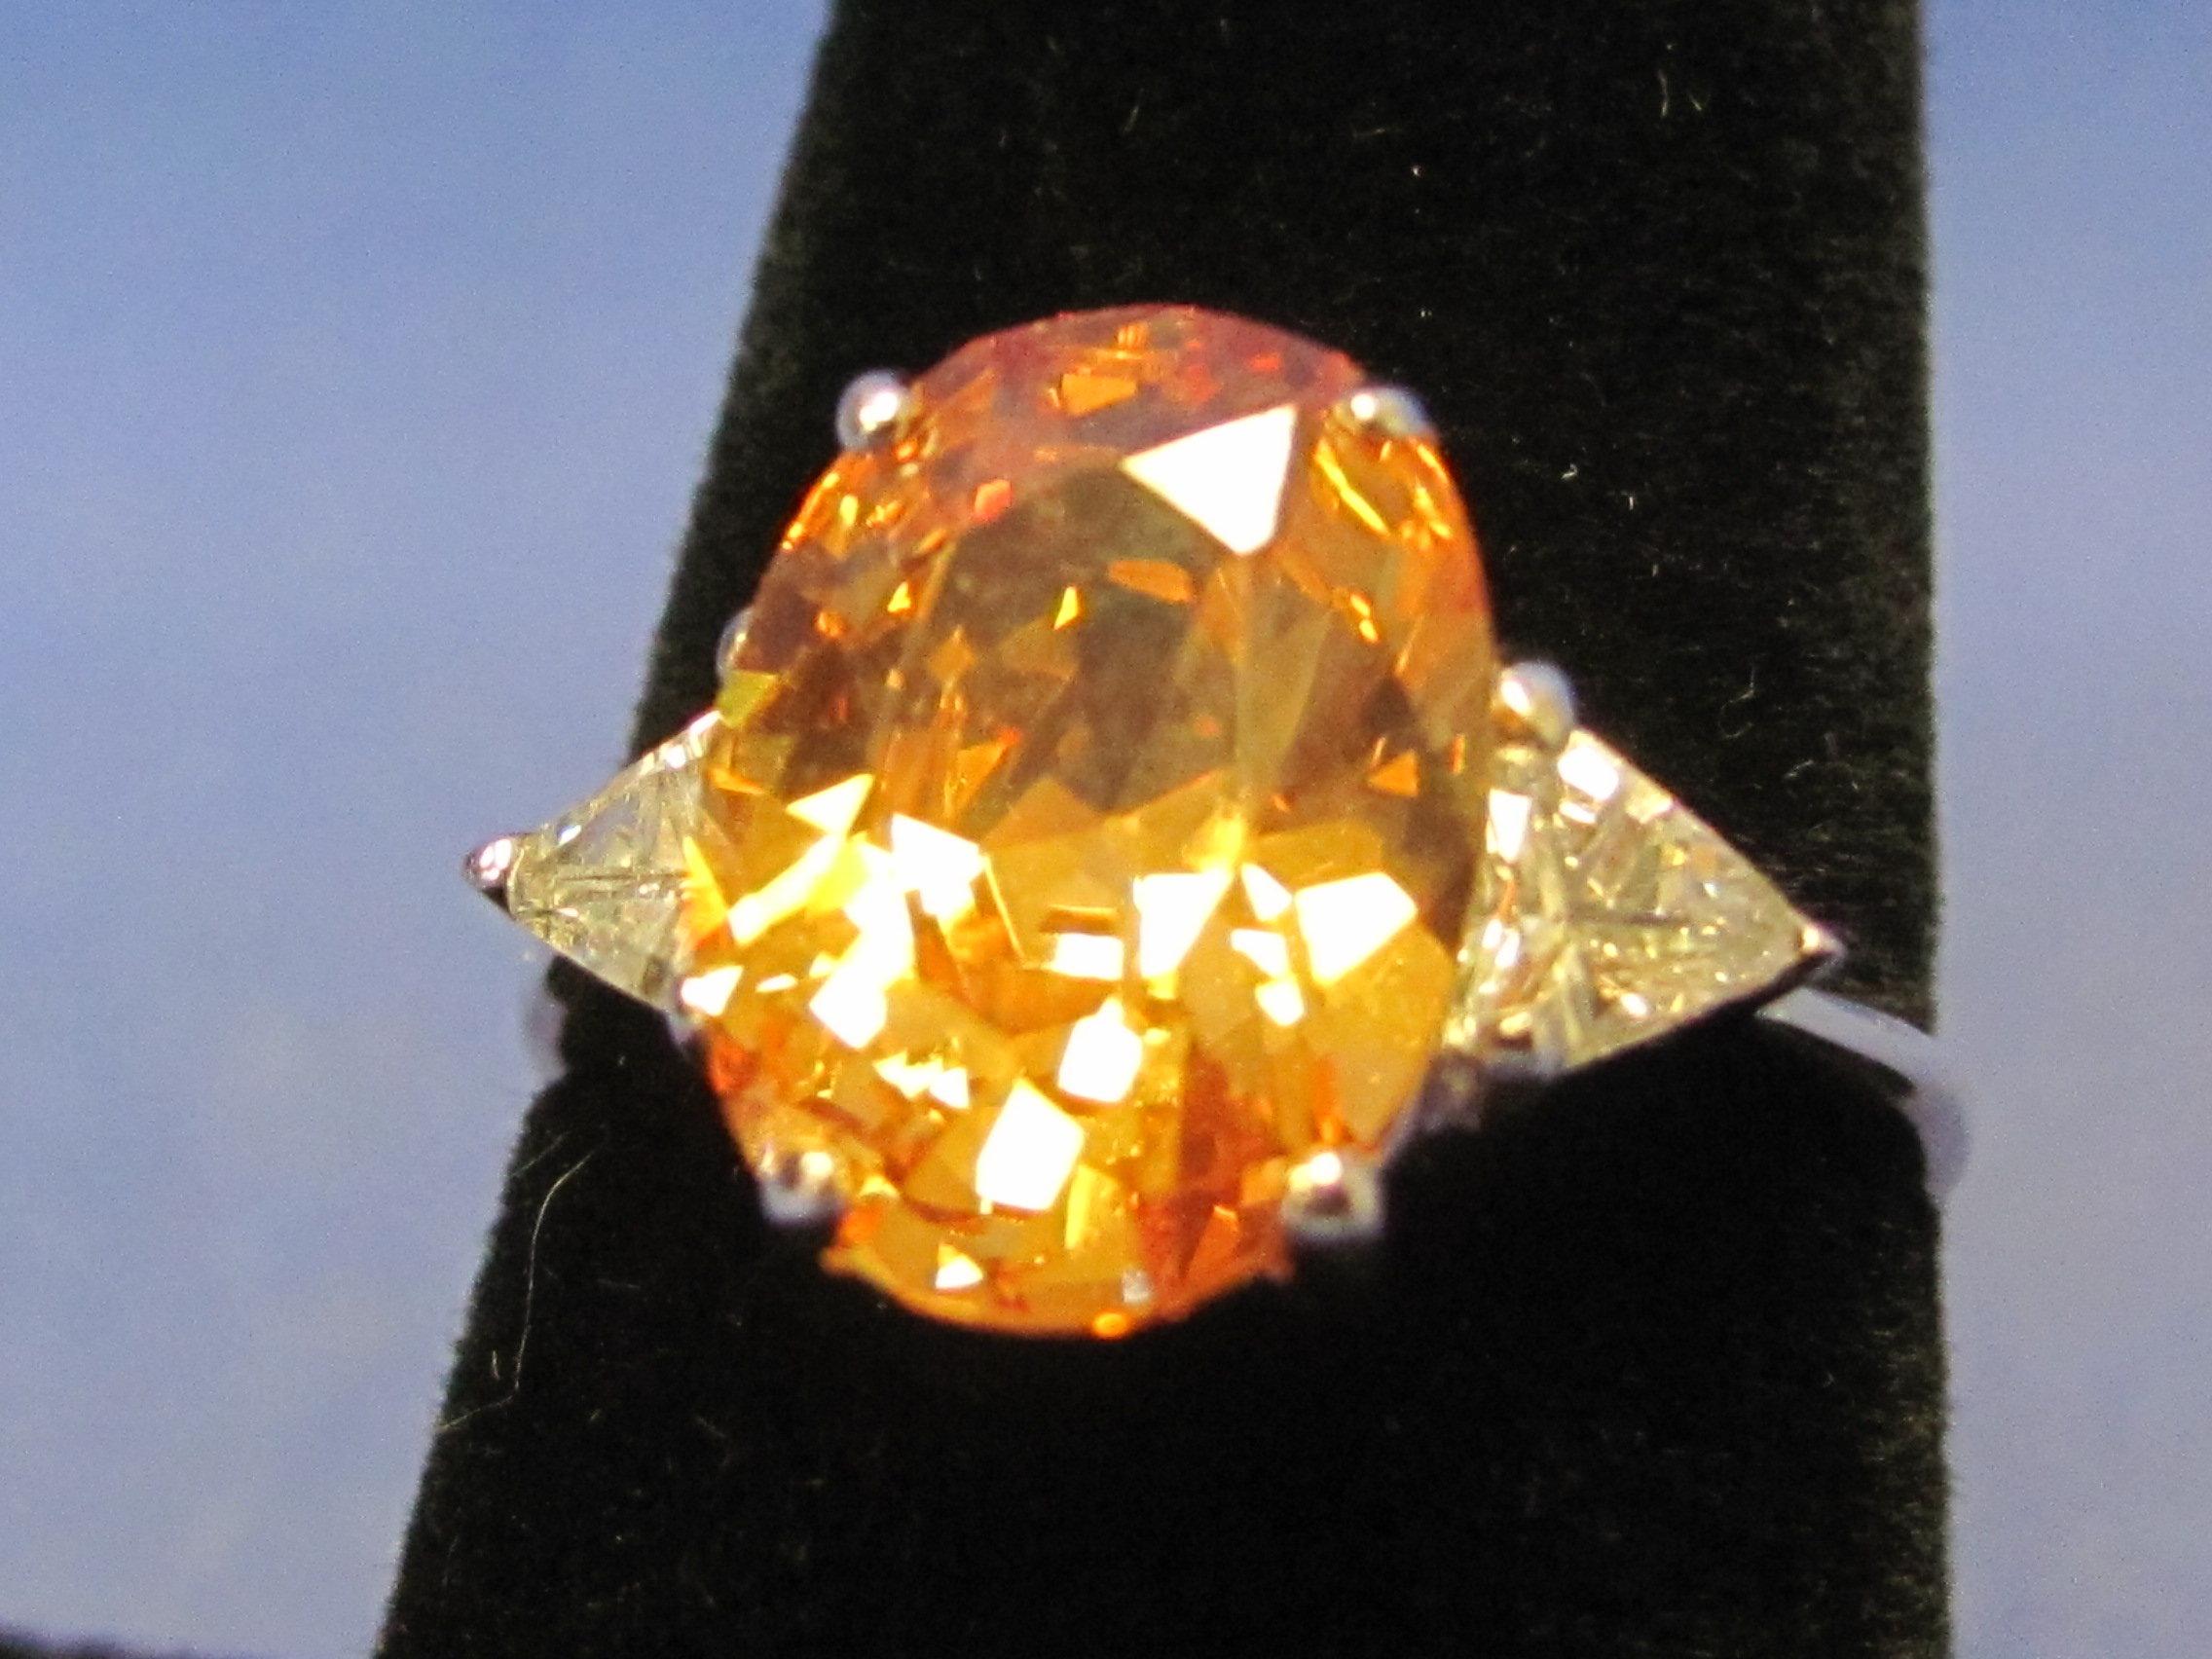 2 Sterling Silver Rings w Light Orange Stones – Size 7.5 & 9.25 – Total weight is 7.9 grams